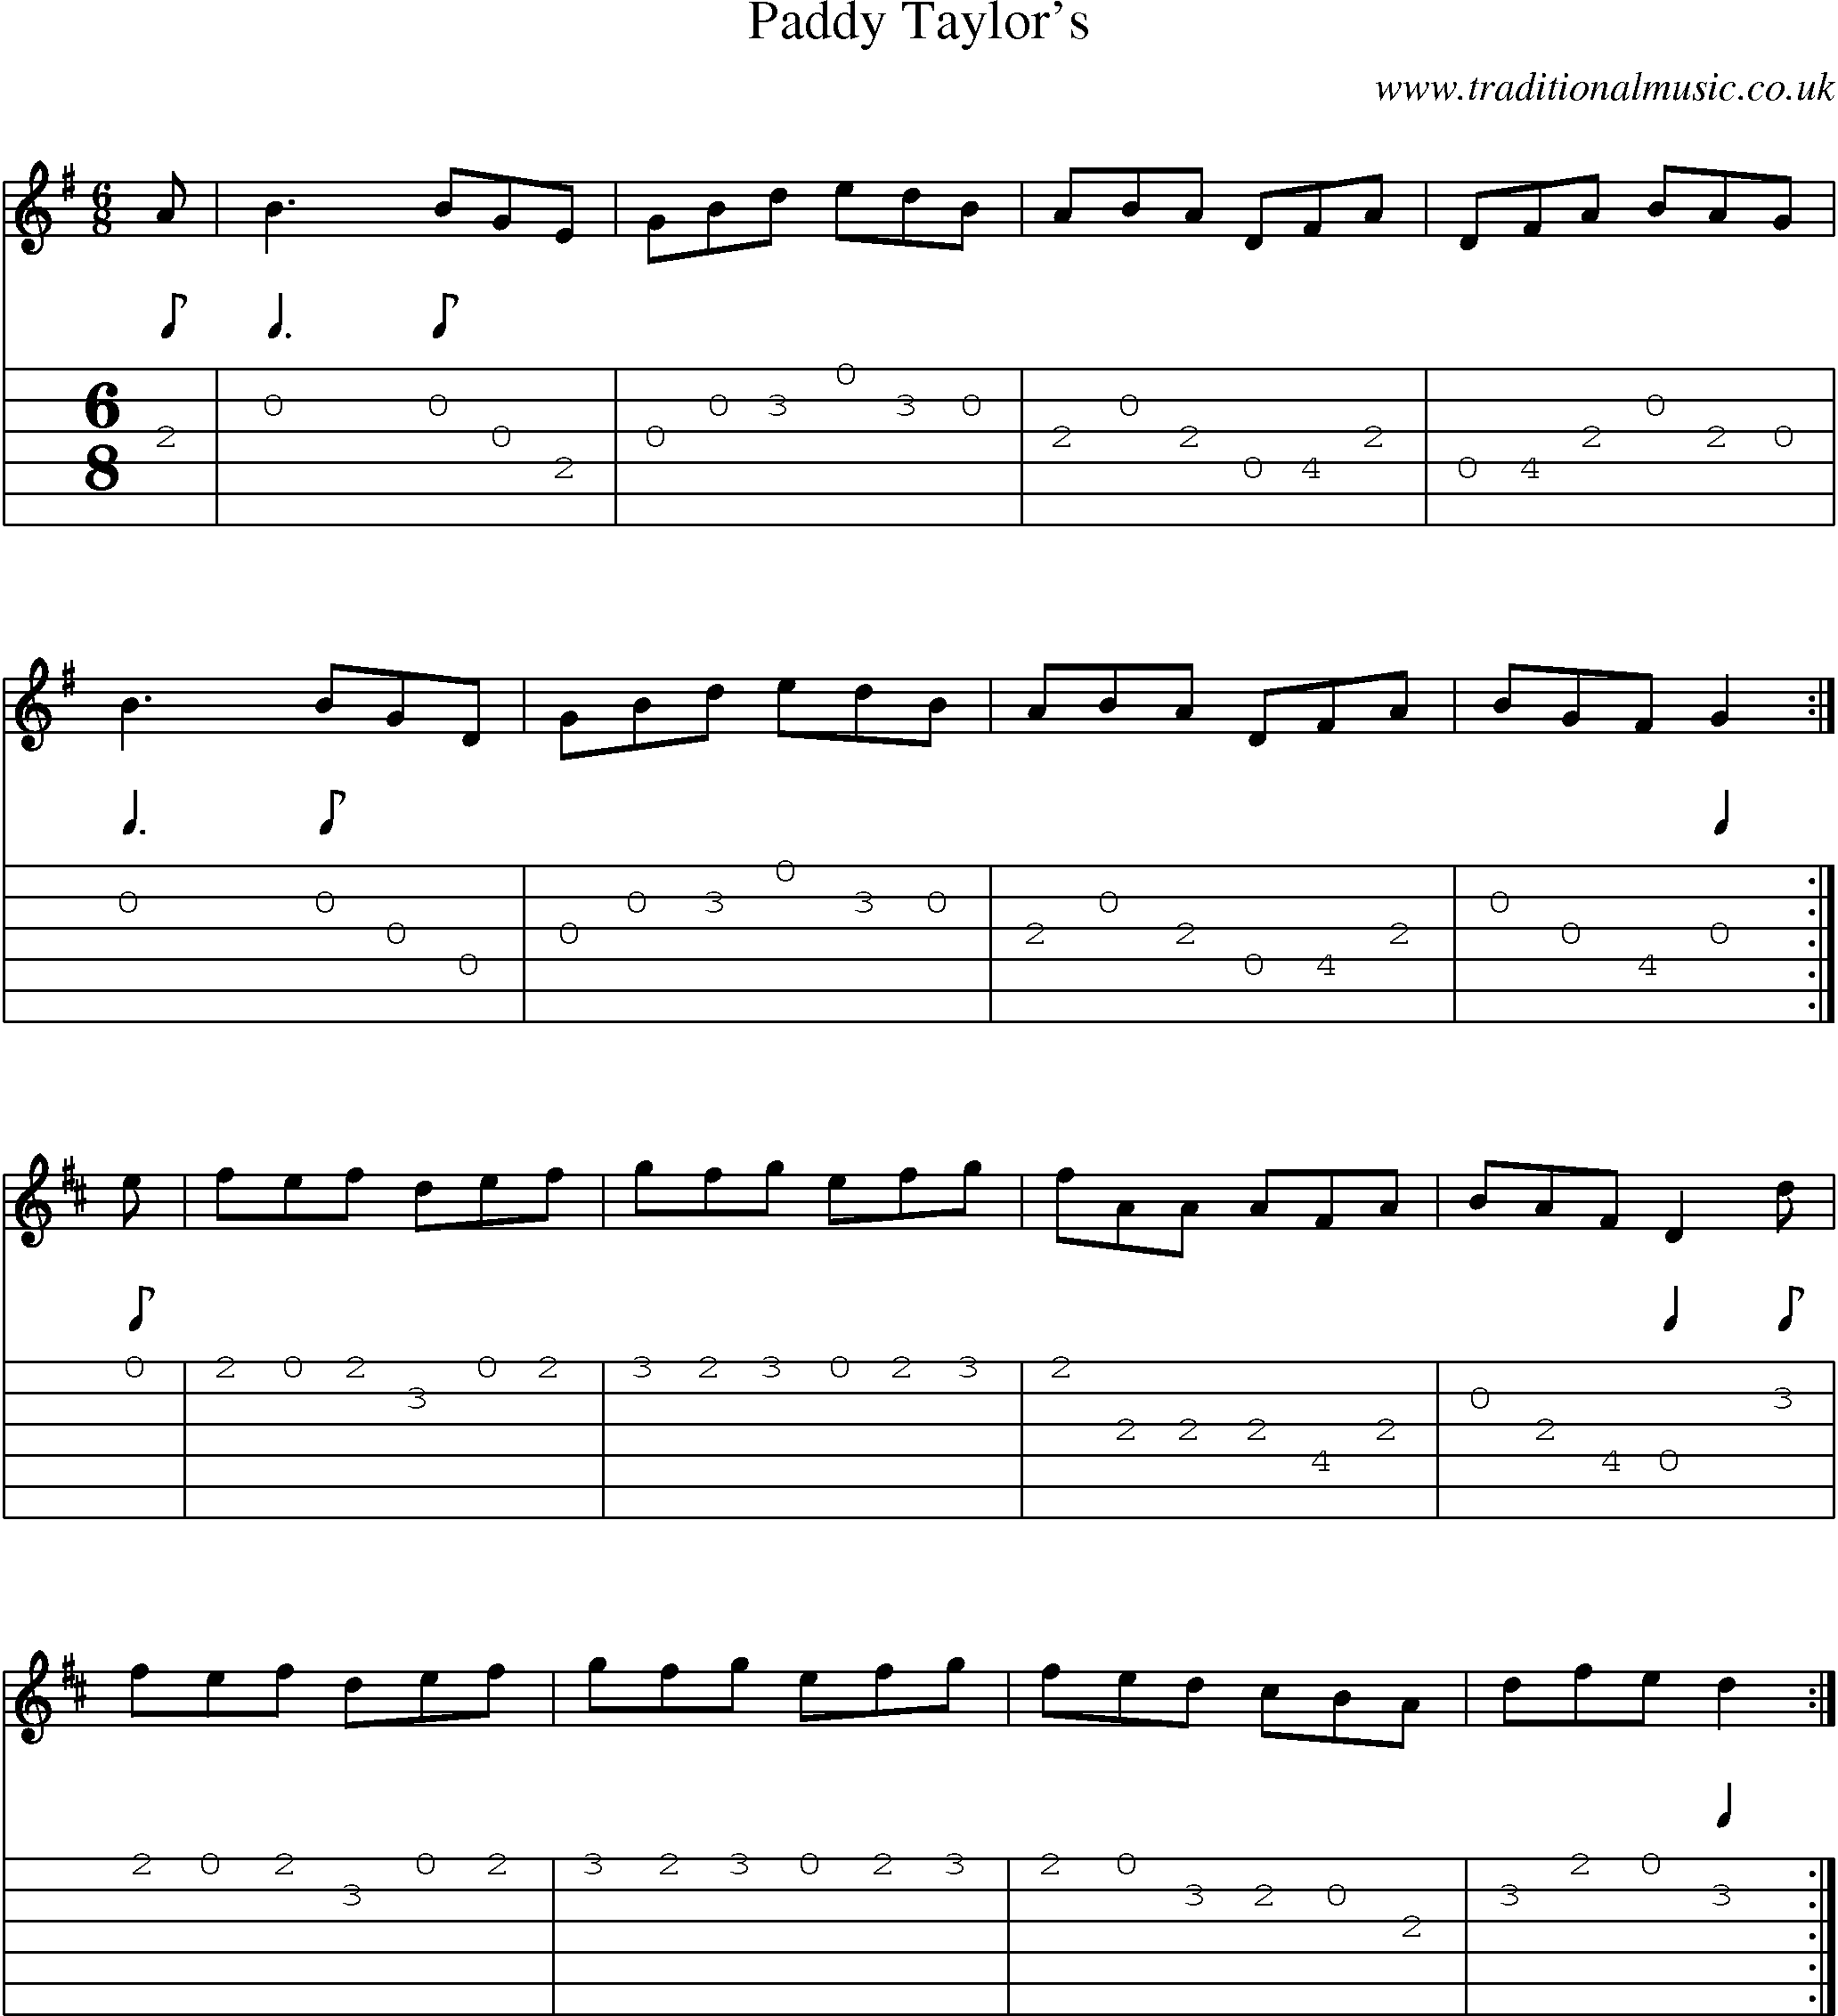 Music Score and Guitar Tabs for Paddy Taylors